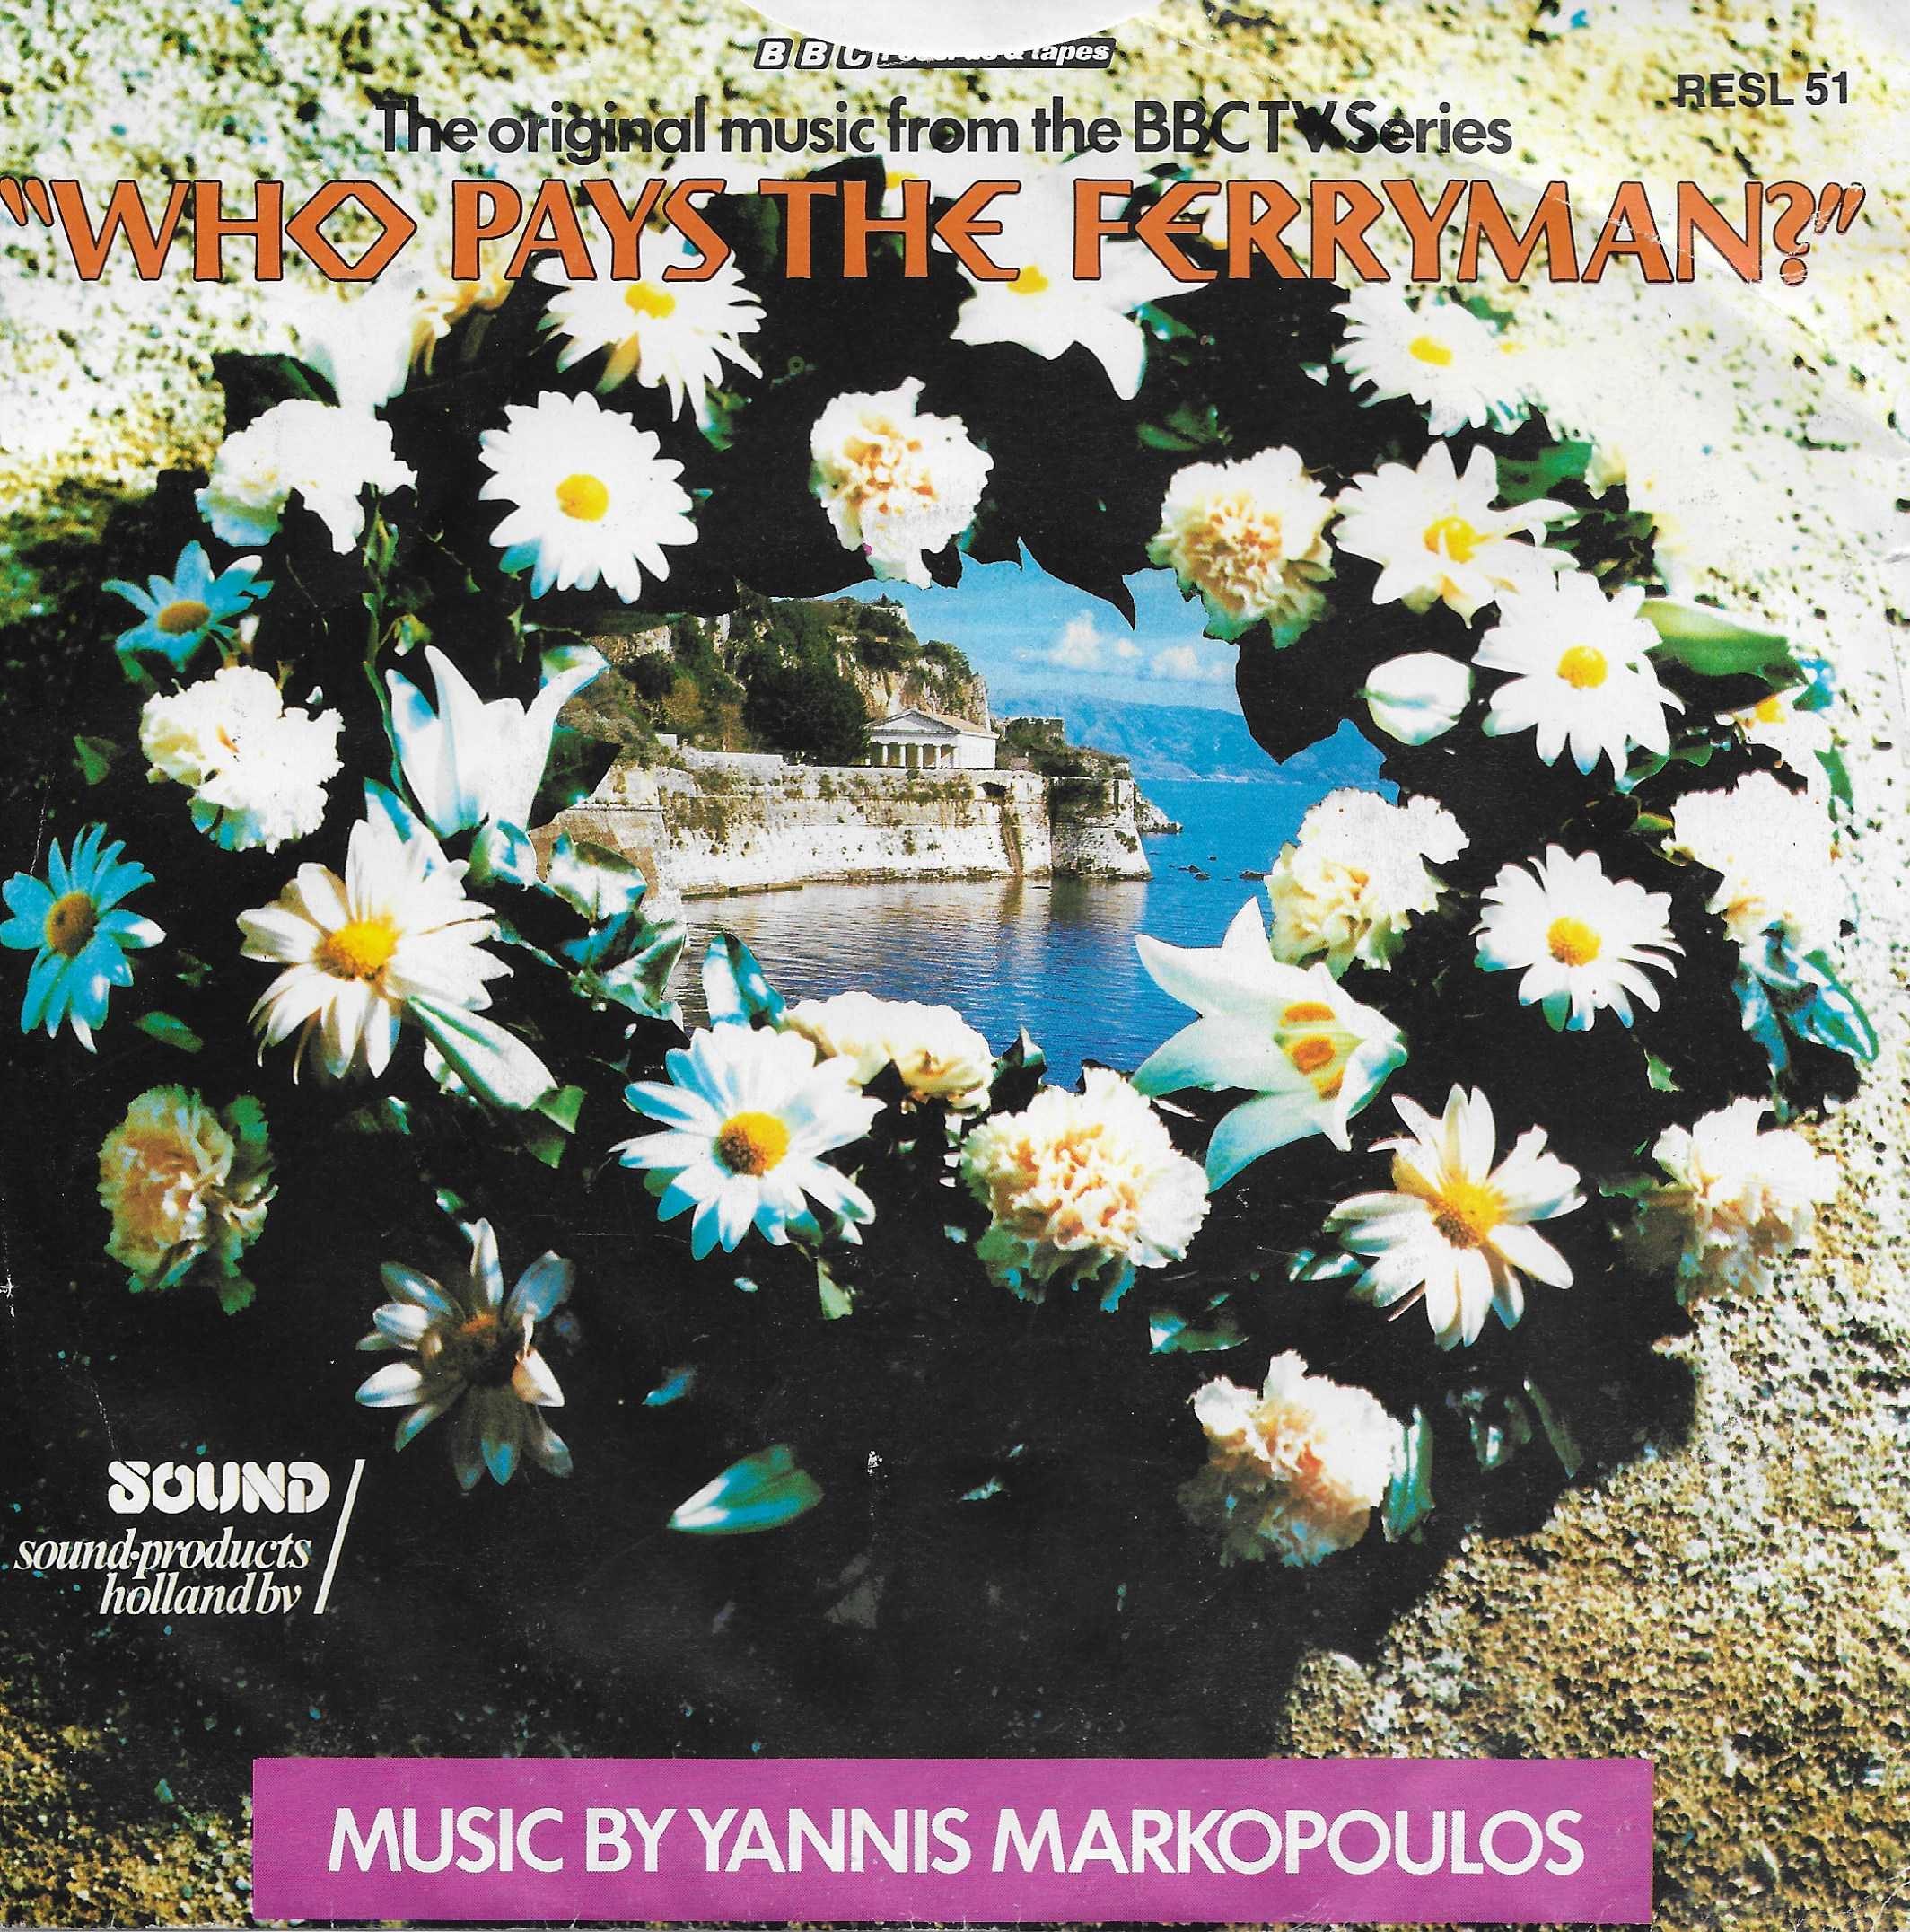 Picture of RESL 51-iDr Who pays the ferryman? by artist Yannis Markopoulos from the BBC records and Tapes library